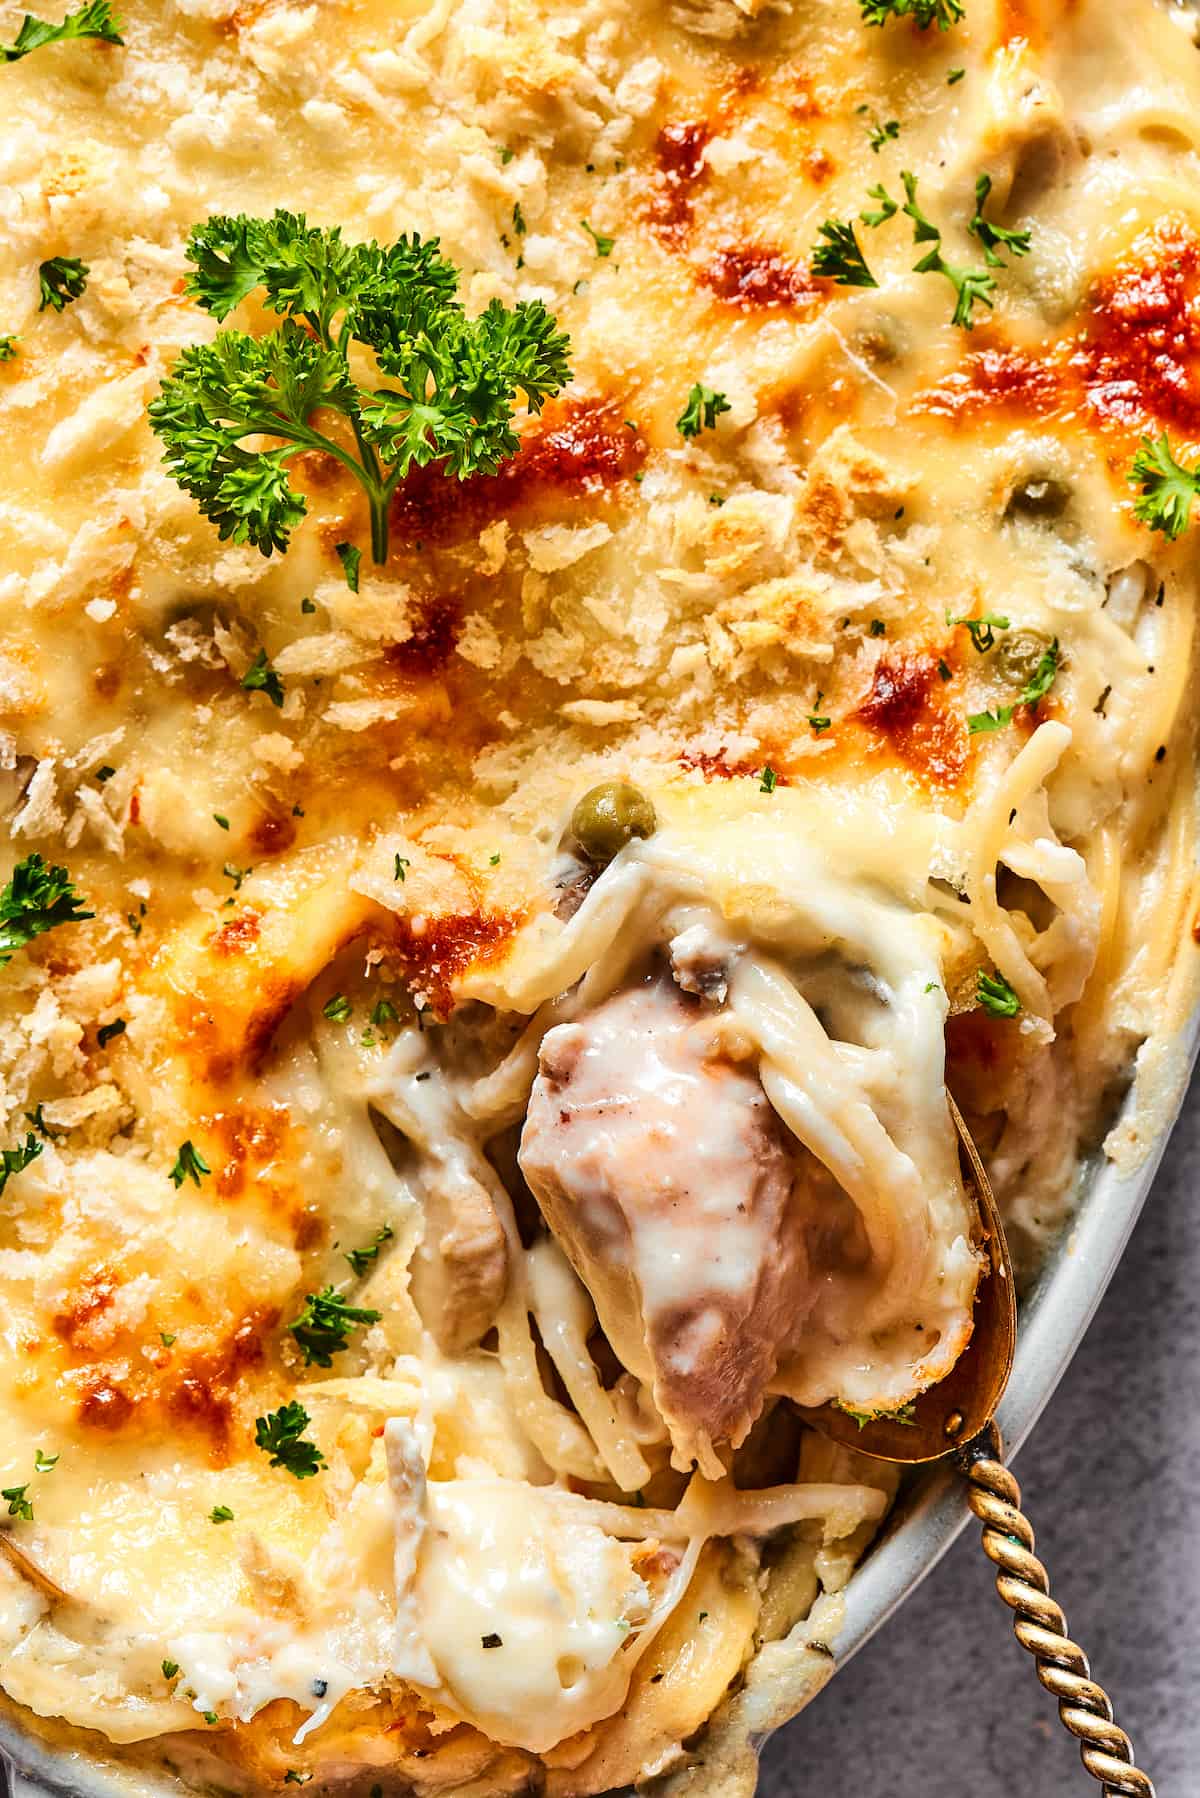 Spooning chicken tetrazzini out of a serving dish.